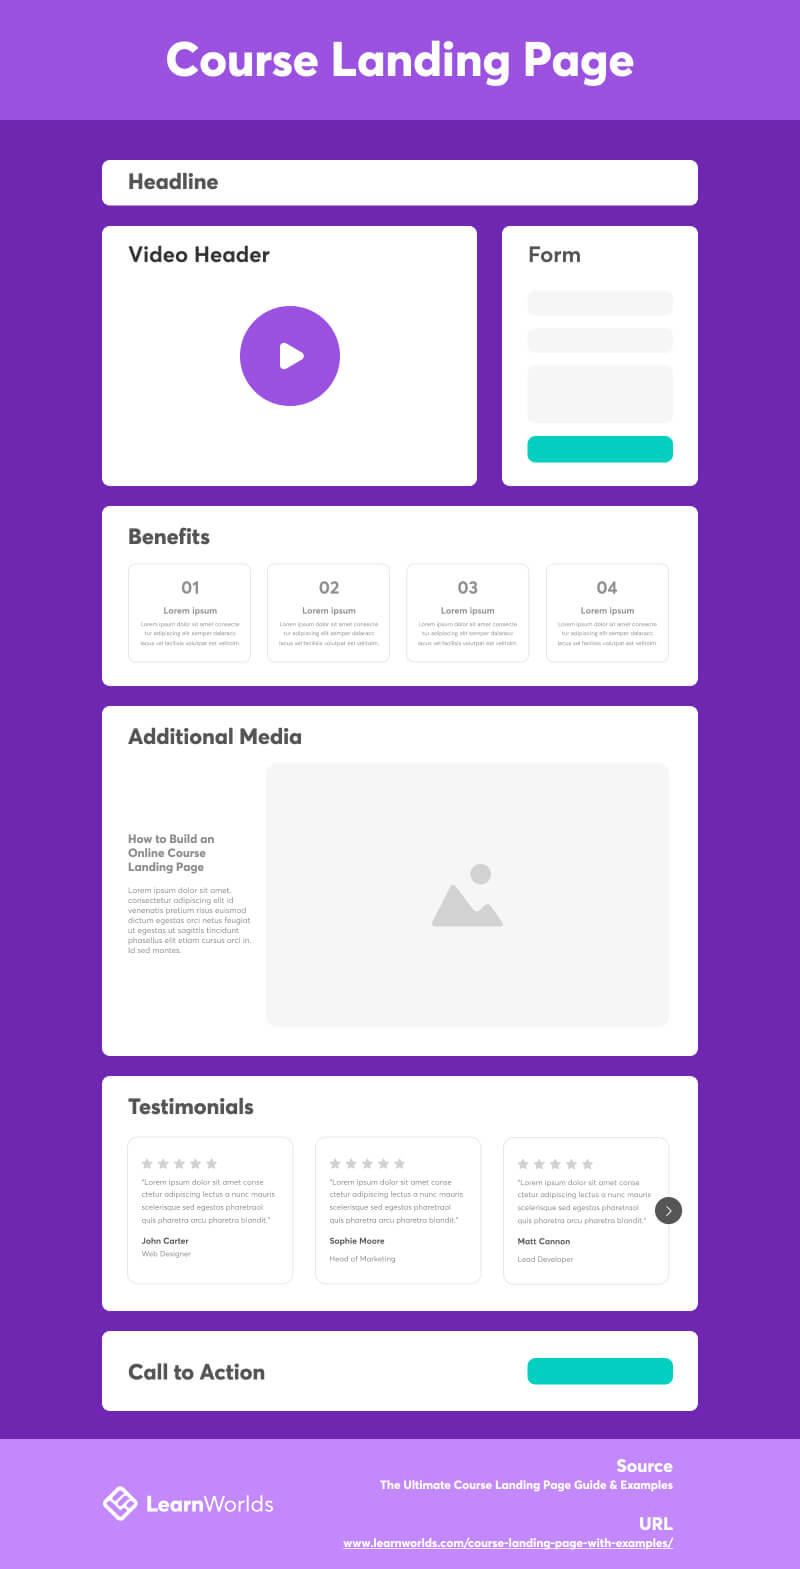 Course landing page guide infographic, showing the different elements of a landing page for an online course, from the header, images, benefits, reviews/testimonials, and CTAs.